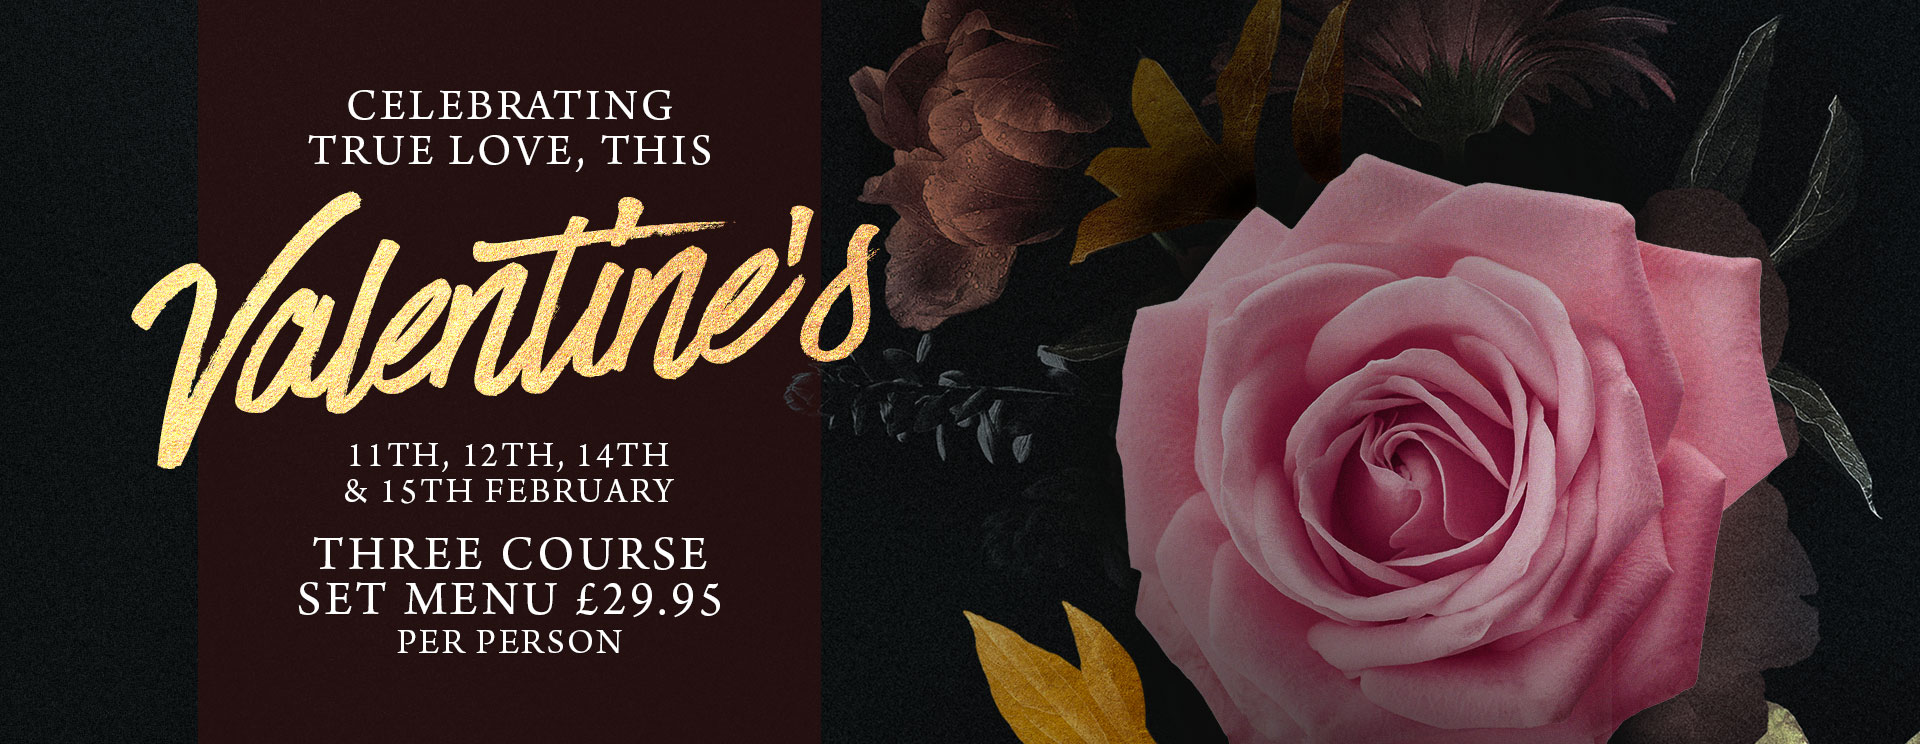 Valentines at The Belvedere Arms